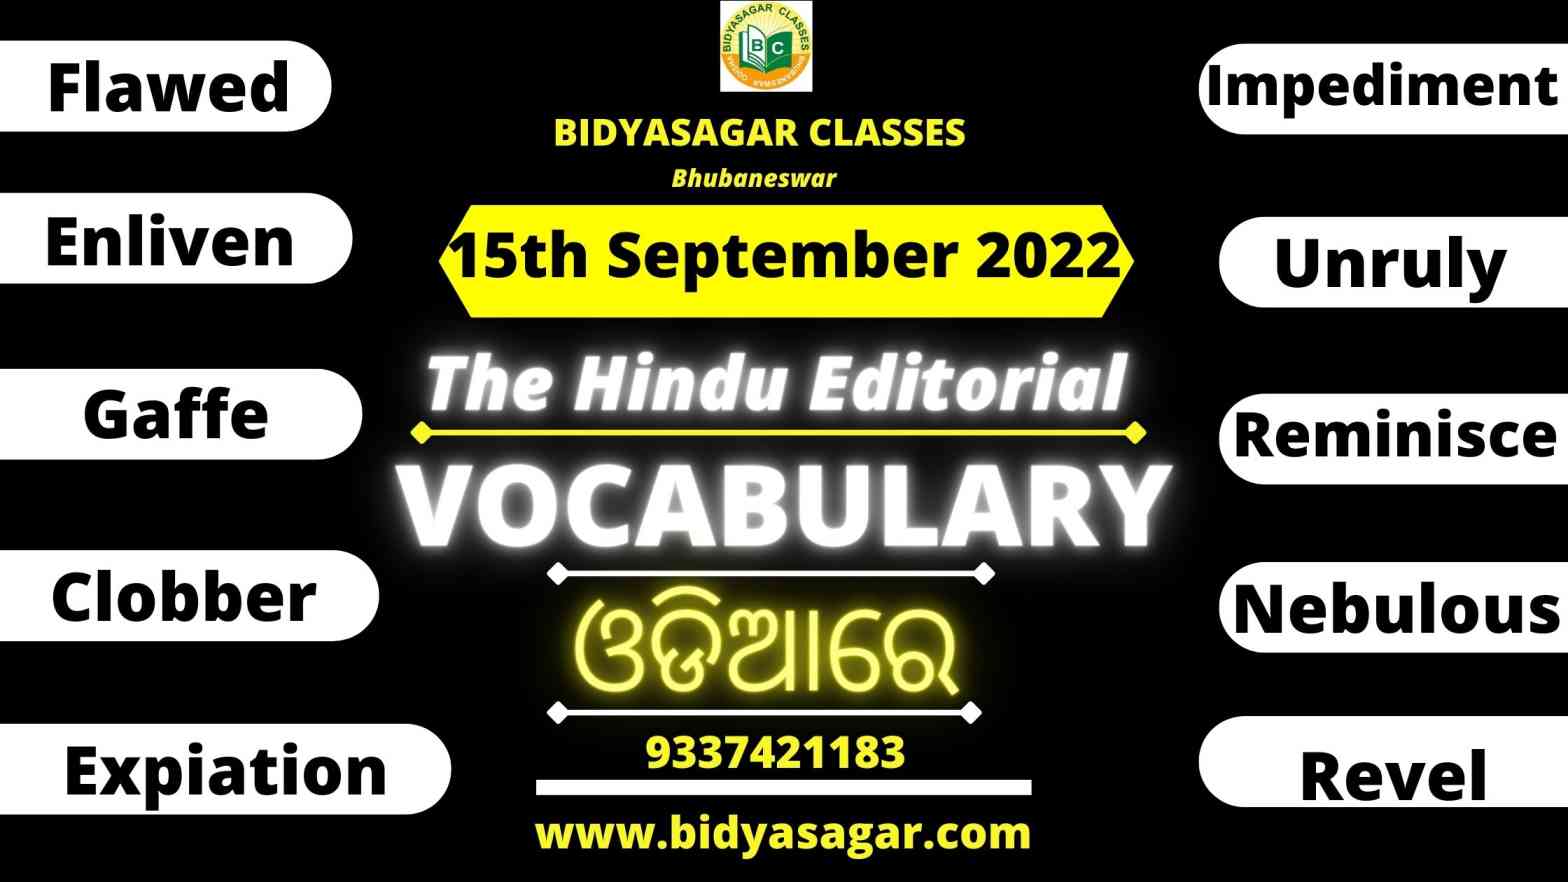 The Hindu Editorial Vocabulary of 15th September 2022